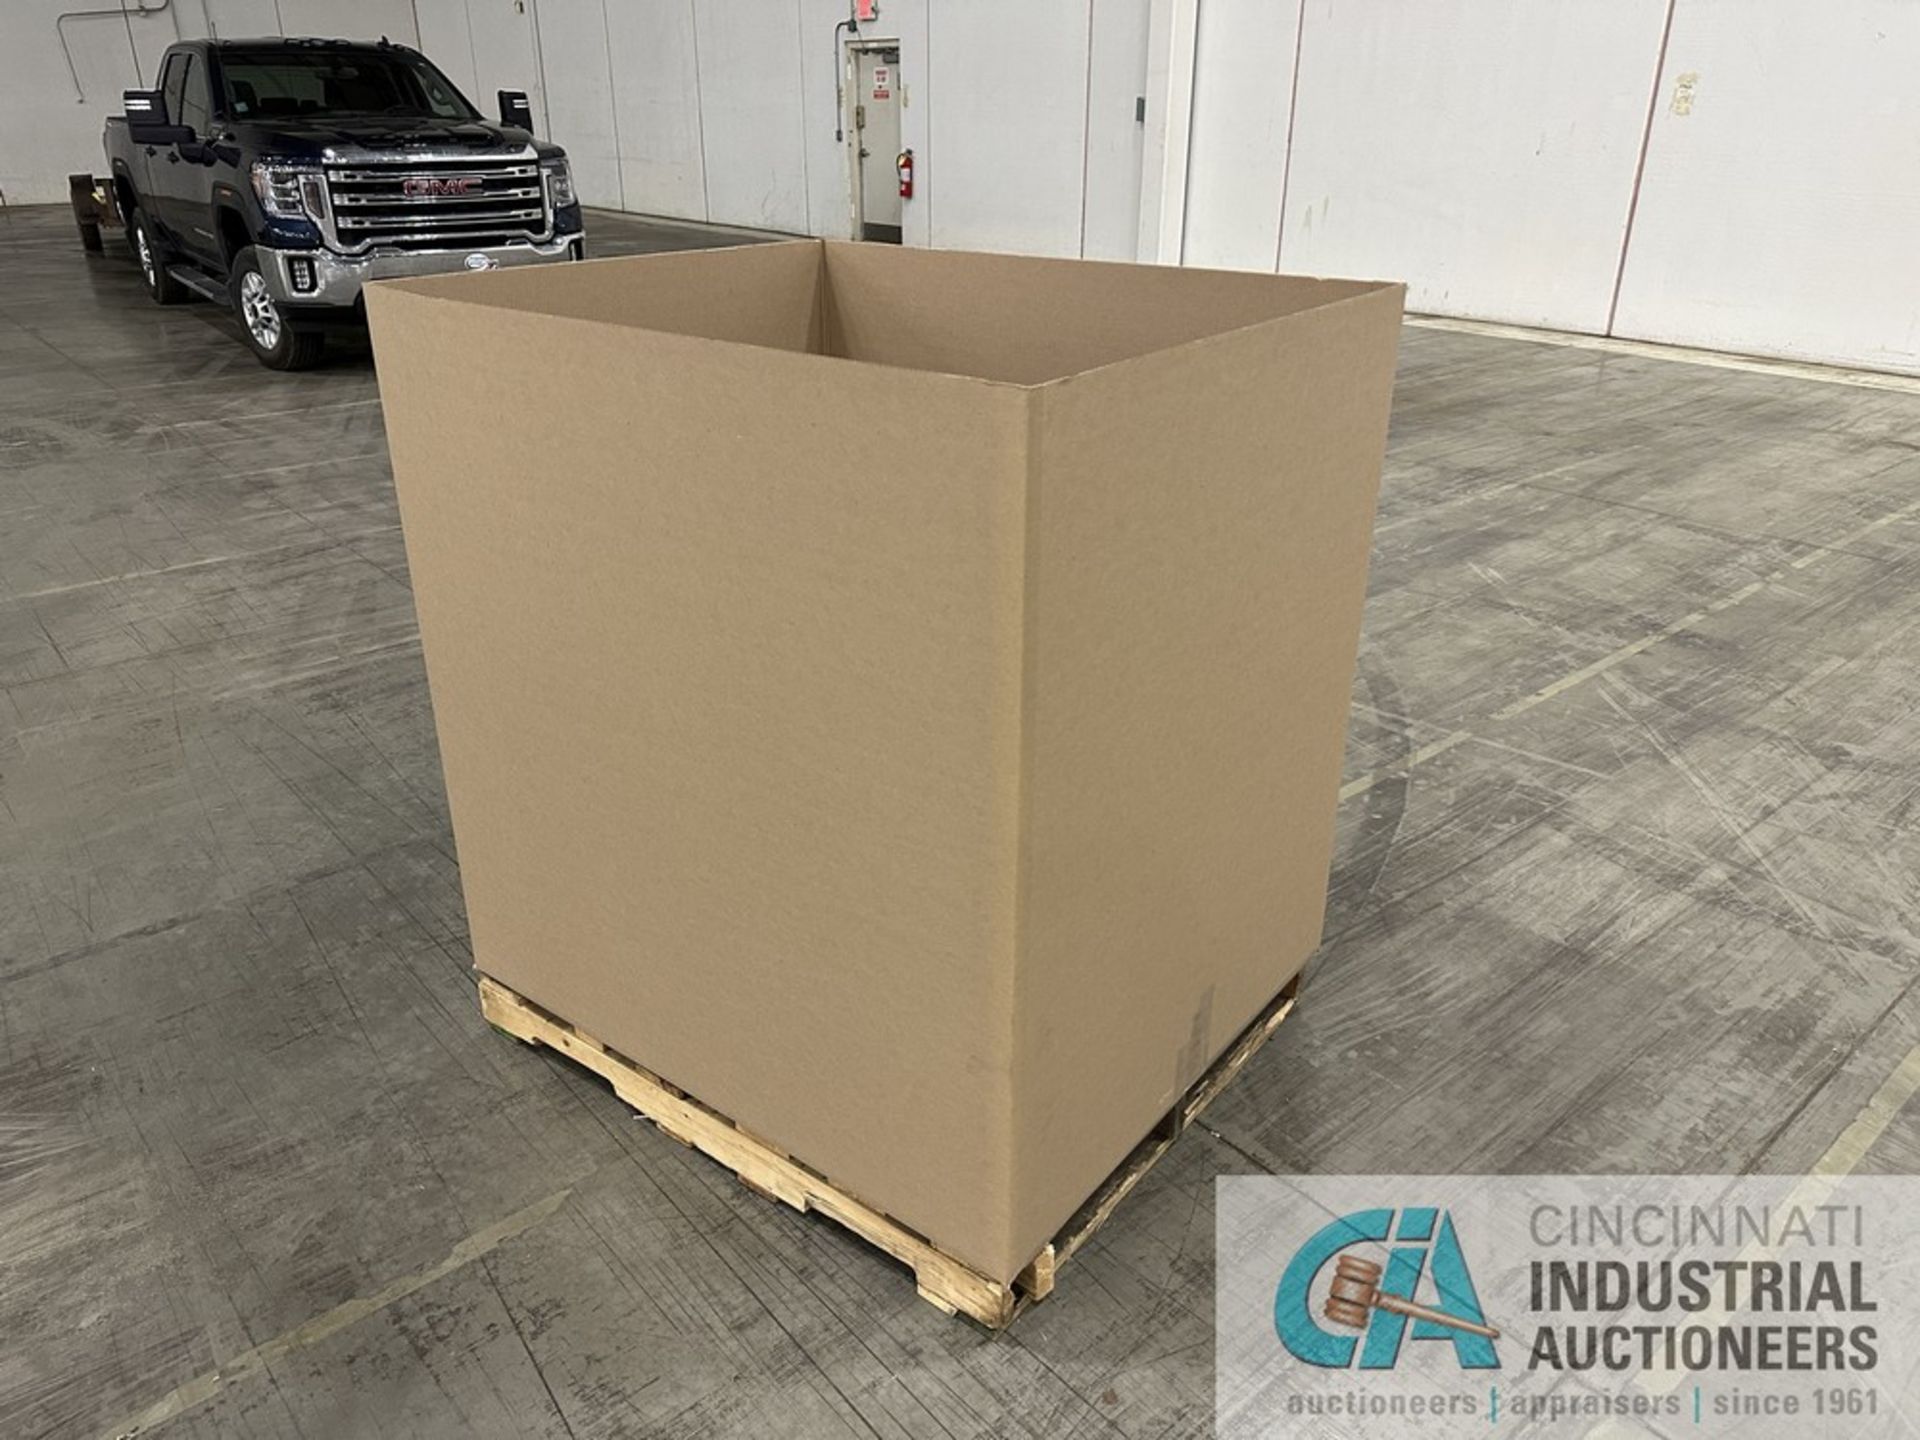 (LOT) 4 SKIDS OF 48" X 40" X 48" GAYLORD BOXES APPROX. 550 TOTAL PCS **$250.00 LOADING FEE** - Image 4 of 4